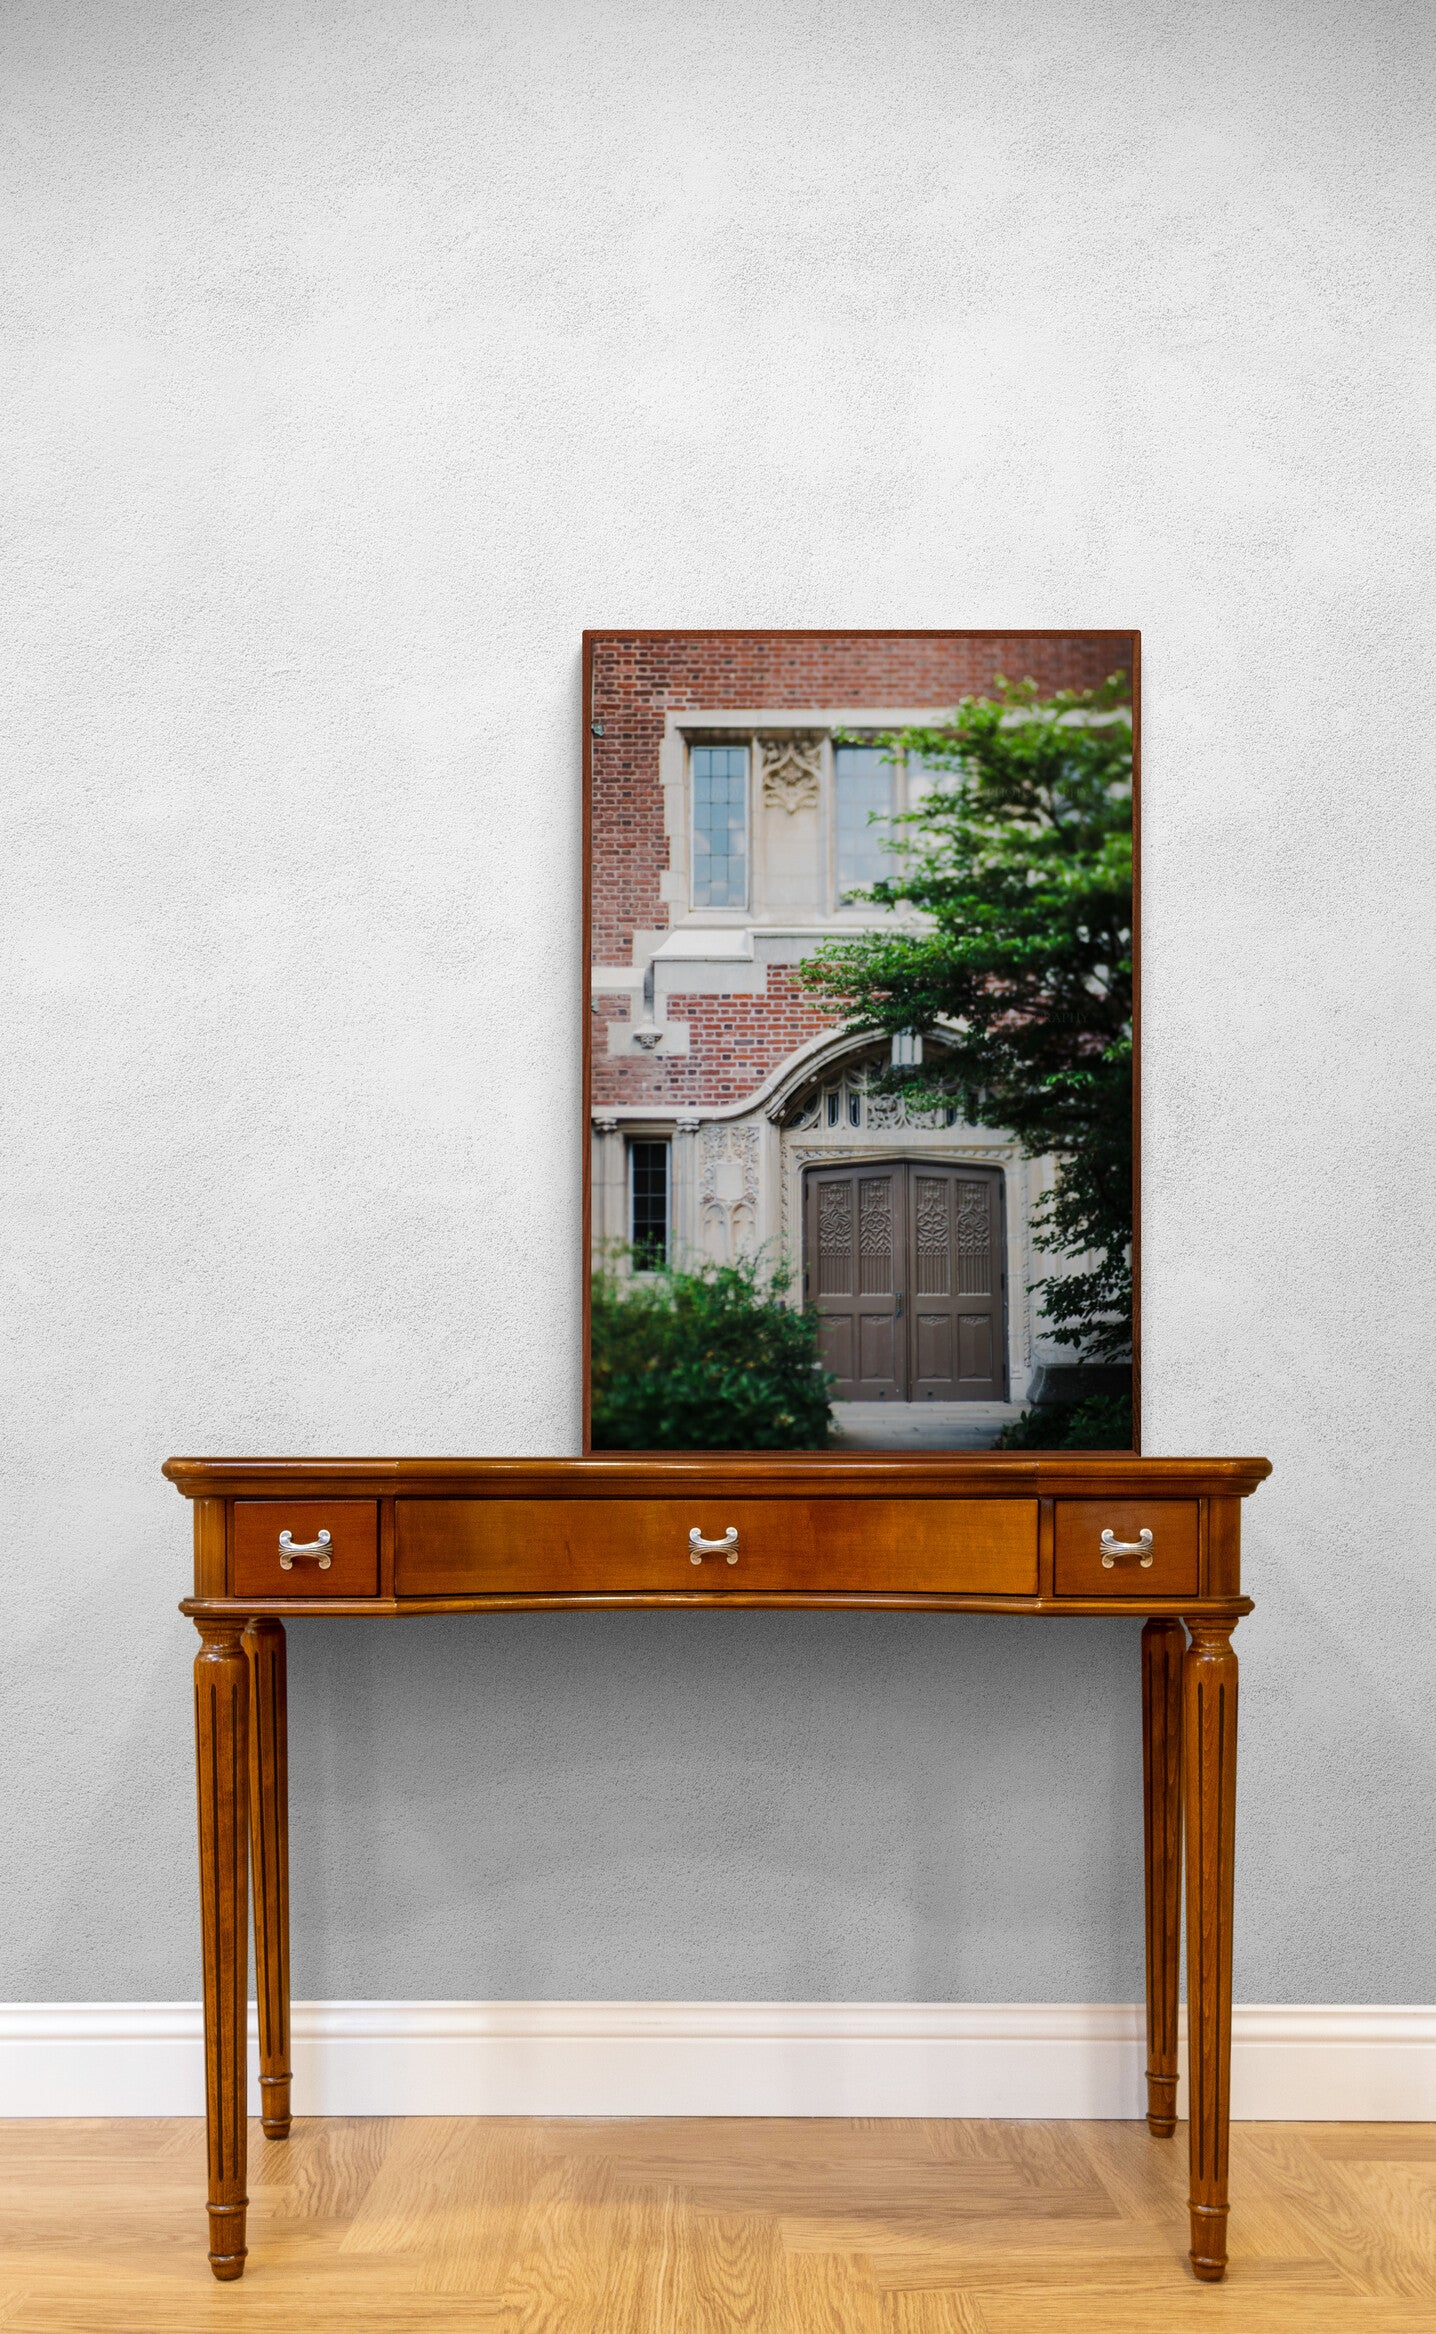 Wellesley College Dorm Photograph Print in an entryway as wall art